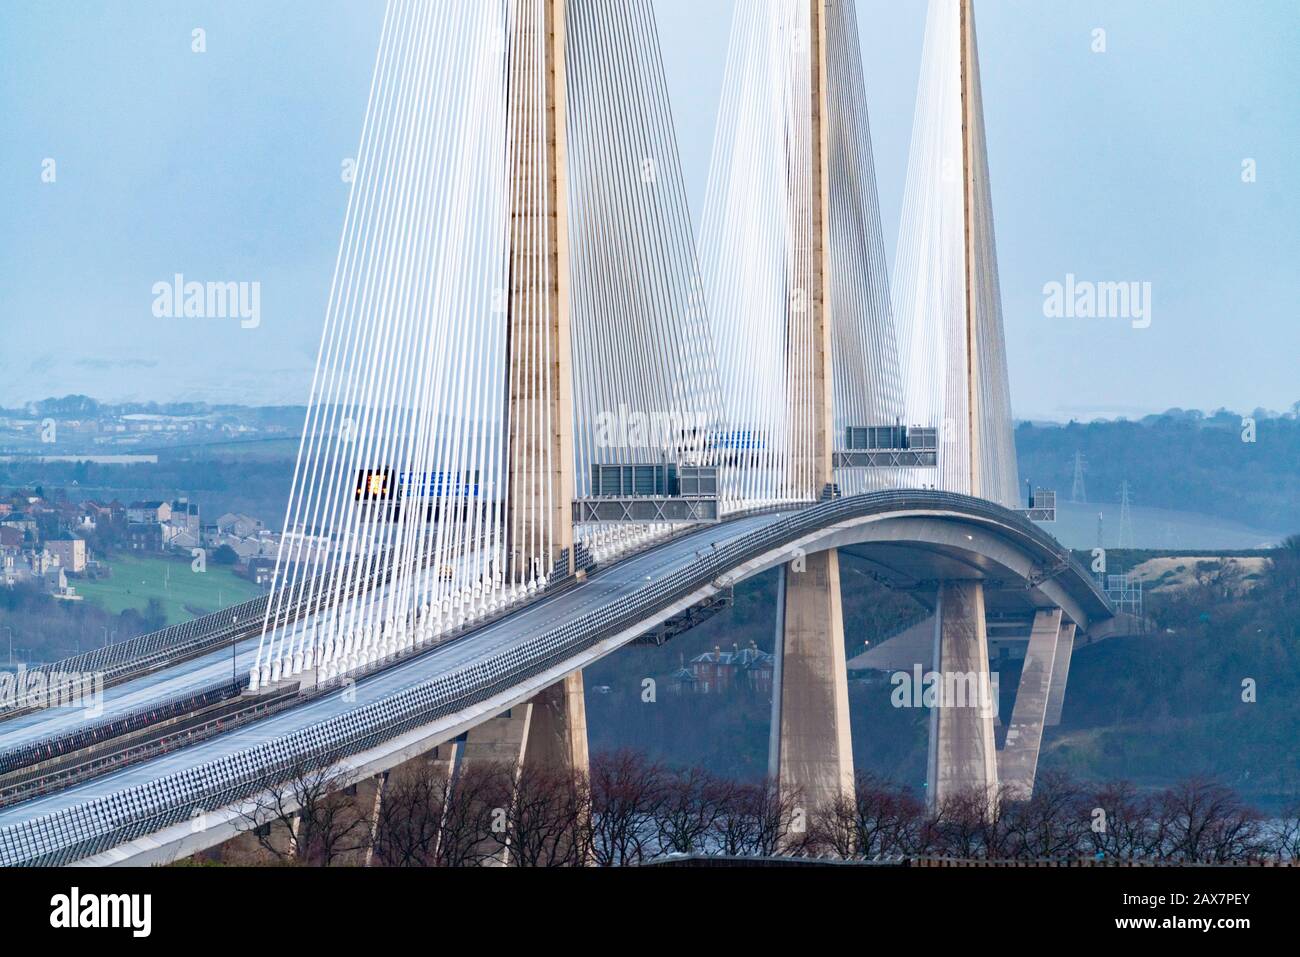 South Queensferry, Scotland, UK. 11 February, 2020.  Queensferry Crossing bridge closed to all traffic in both directions because of danger of falling ice from overhead supporting cables. Several cars have been damaged by falling ice during Storm Ciara.Traffic is being diverted via Kincardine Bridge.  Iain Masterton/Alamy Live News. Stock Photo